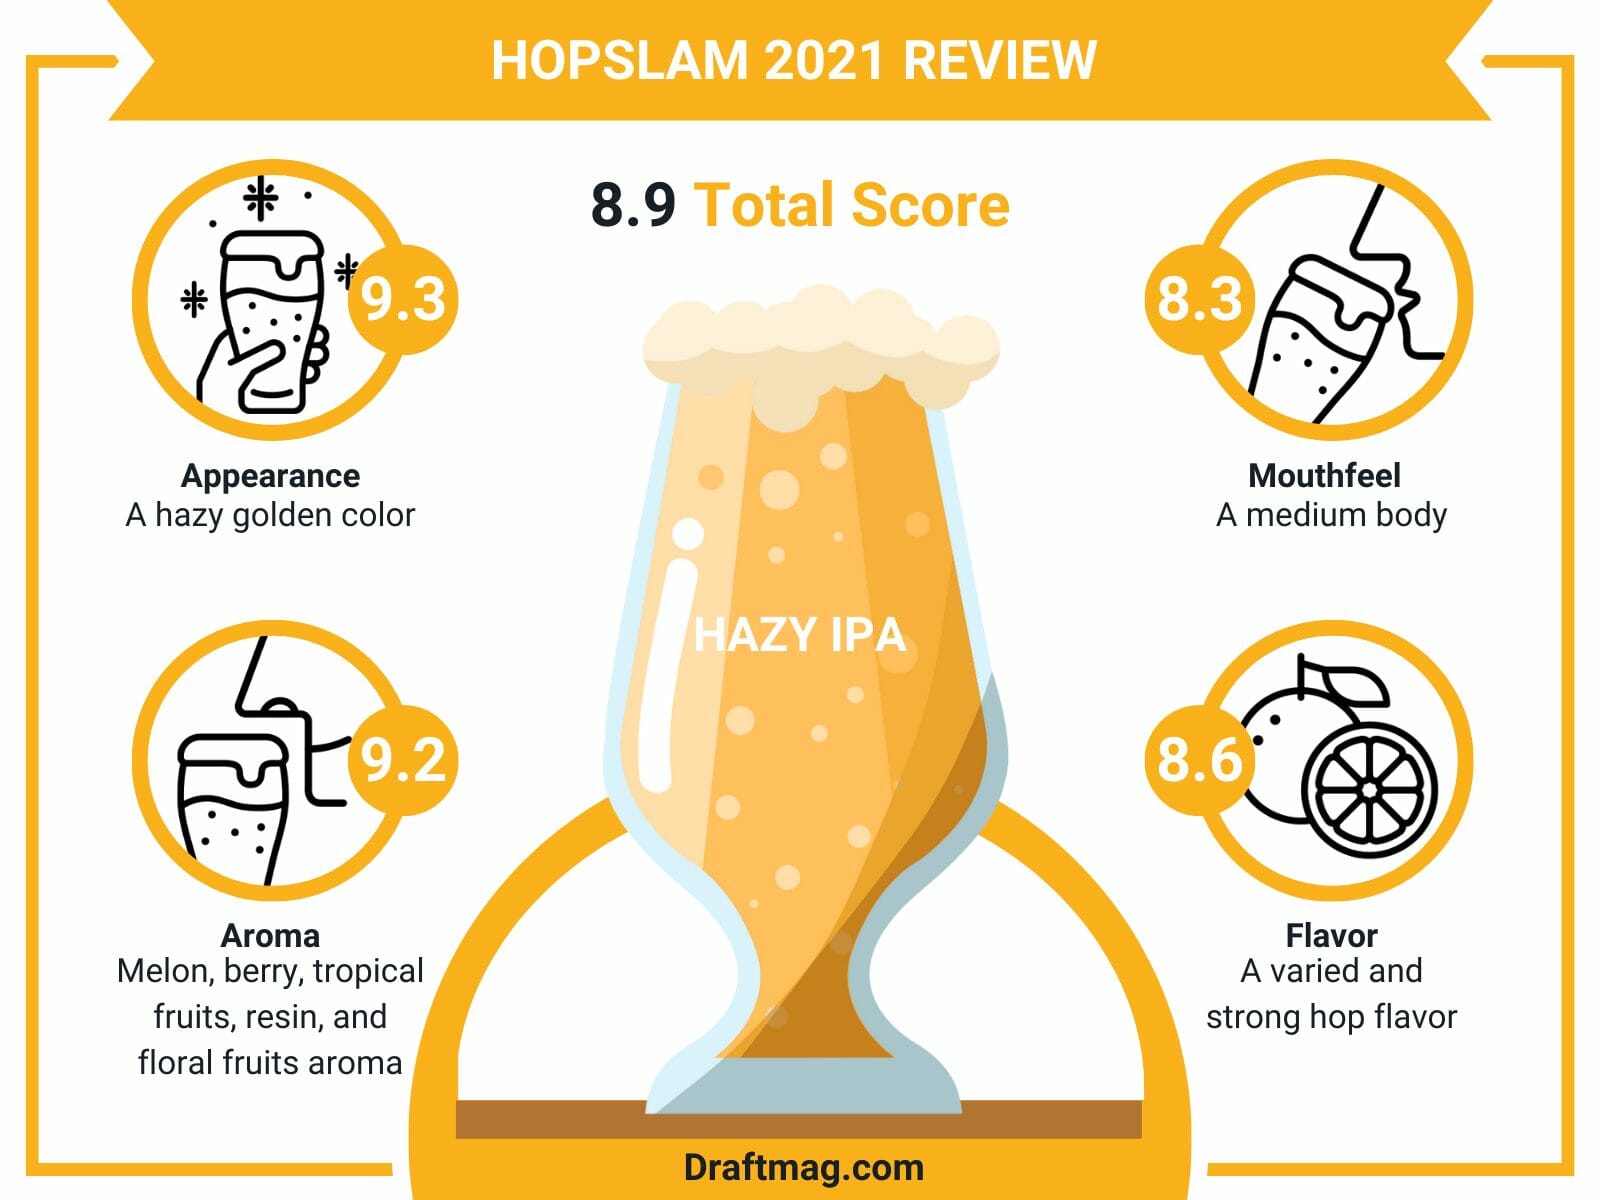 Hopslam 2021 Review Infographic